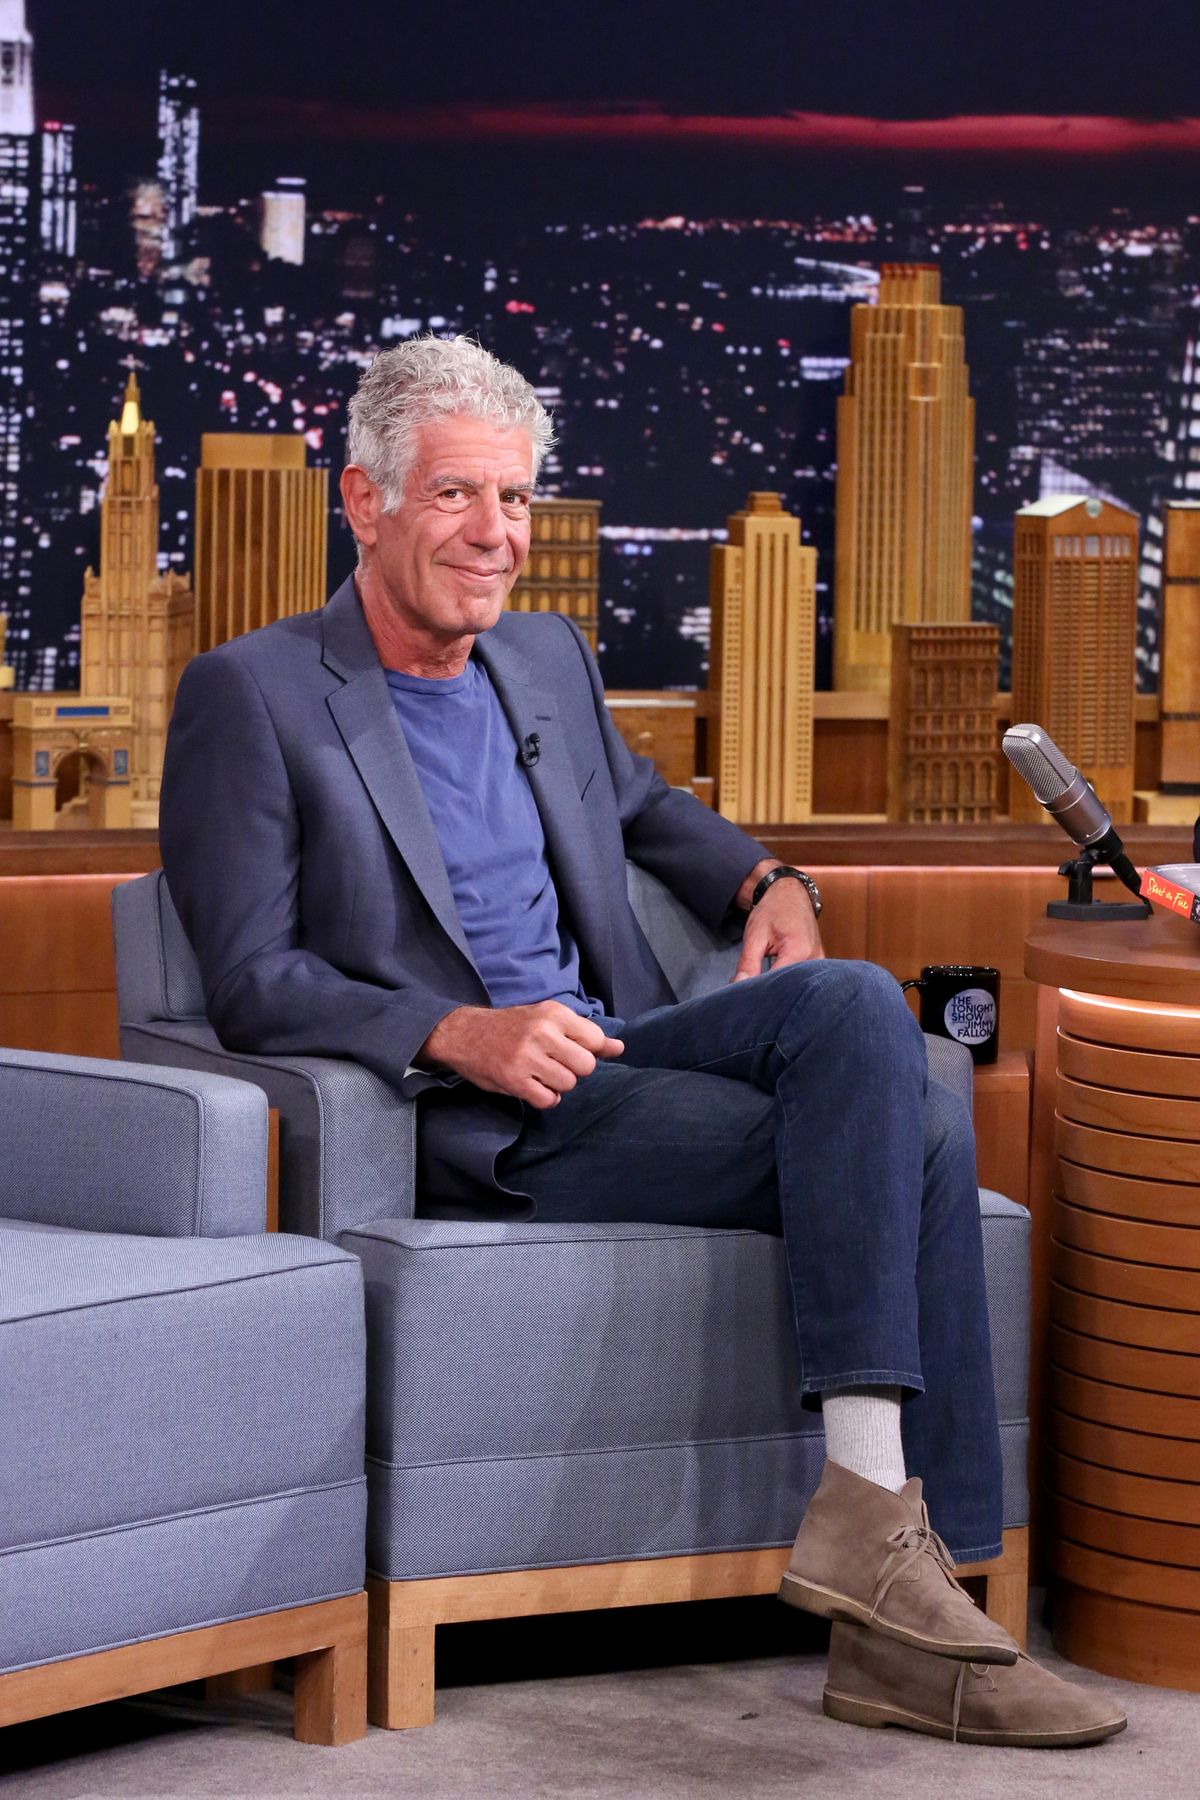 Anthony Bourdain Clarks Boots - Anthony Bourdain and His Go-To Travel Shoes